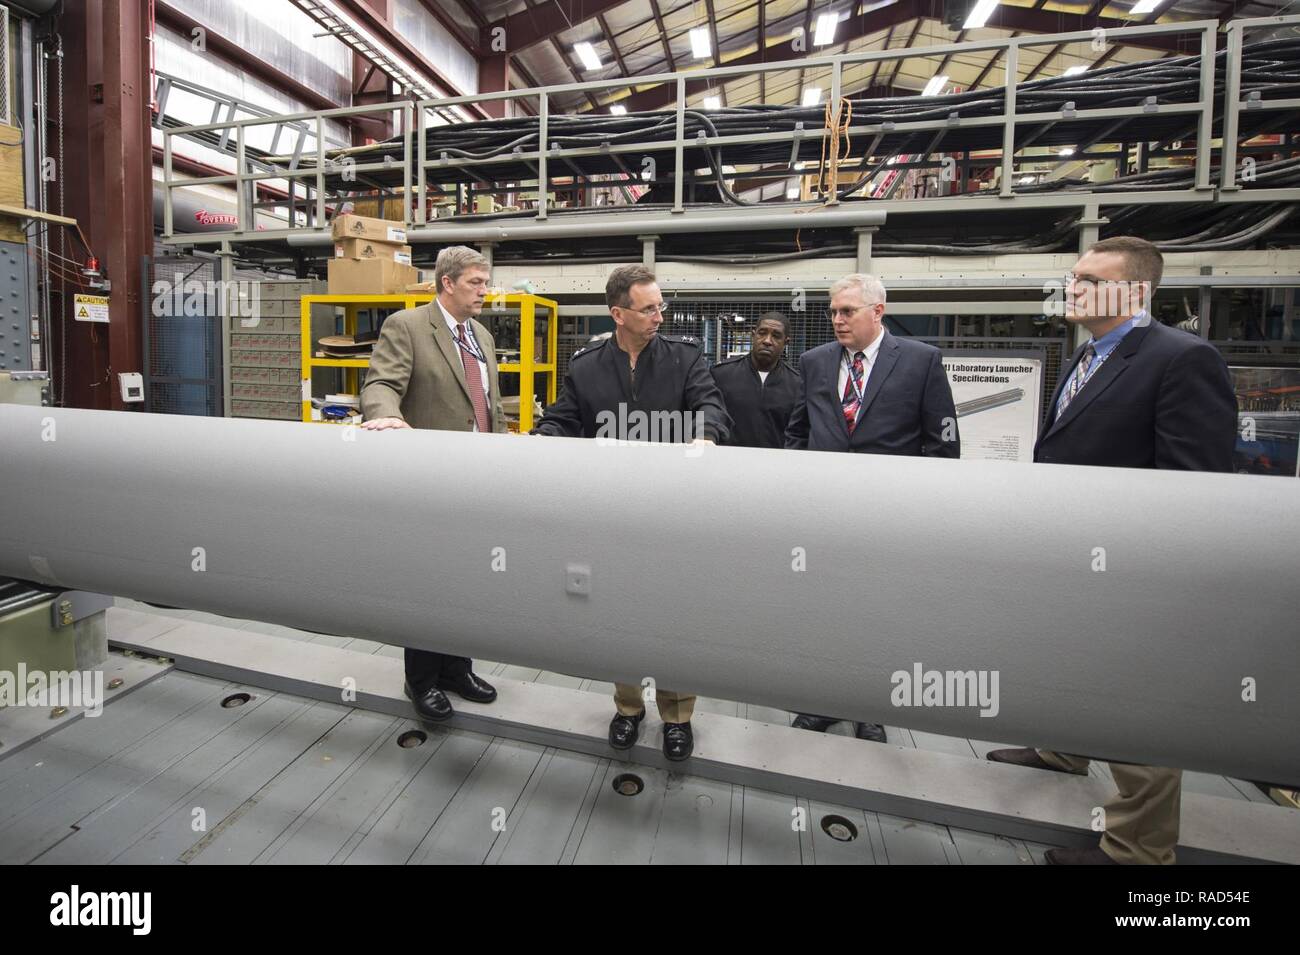 DAHLGREN (Jan. 12, 2017) Tom Boucher, second from right, program manager for the Electromagnetic Railgun at the Office of Naval Research (ONR), talks to Rear Adm. David Hahn, chief of naval research, during a visit to the railgun facility located at Naval Surface Warfare Center, Dahlgren Division. The EM Railgun launcher is a long-range weapon that fires projectiles using electricity instead of chemical propellants. Magnetic fields created by high electrical currents accelerate a sliding metal conductor, or armature, between two rails to launch projectiles at 4,500 mph. Stock Photo